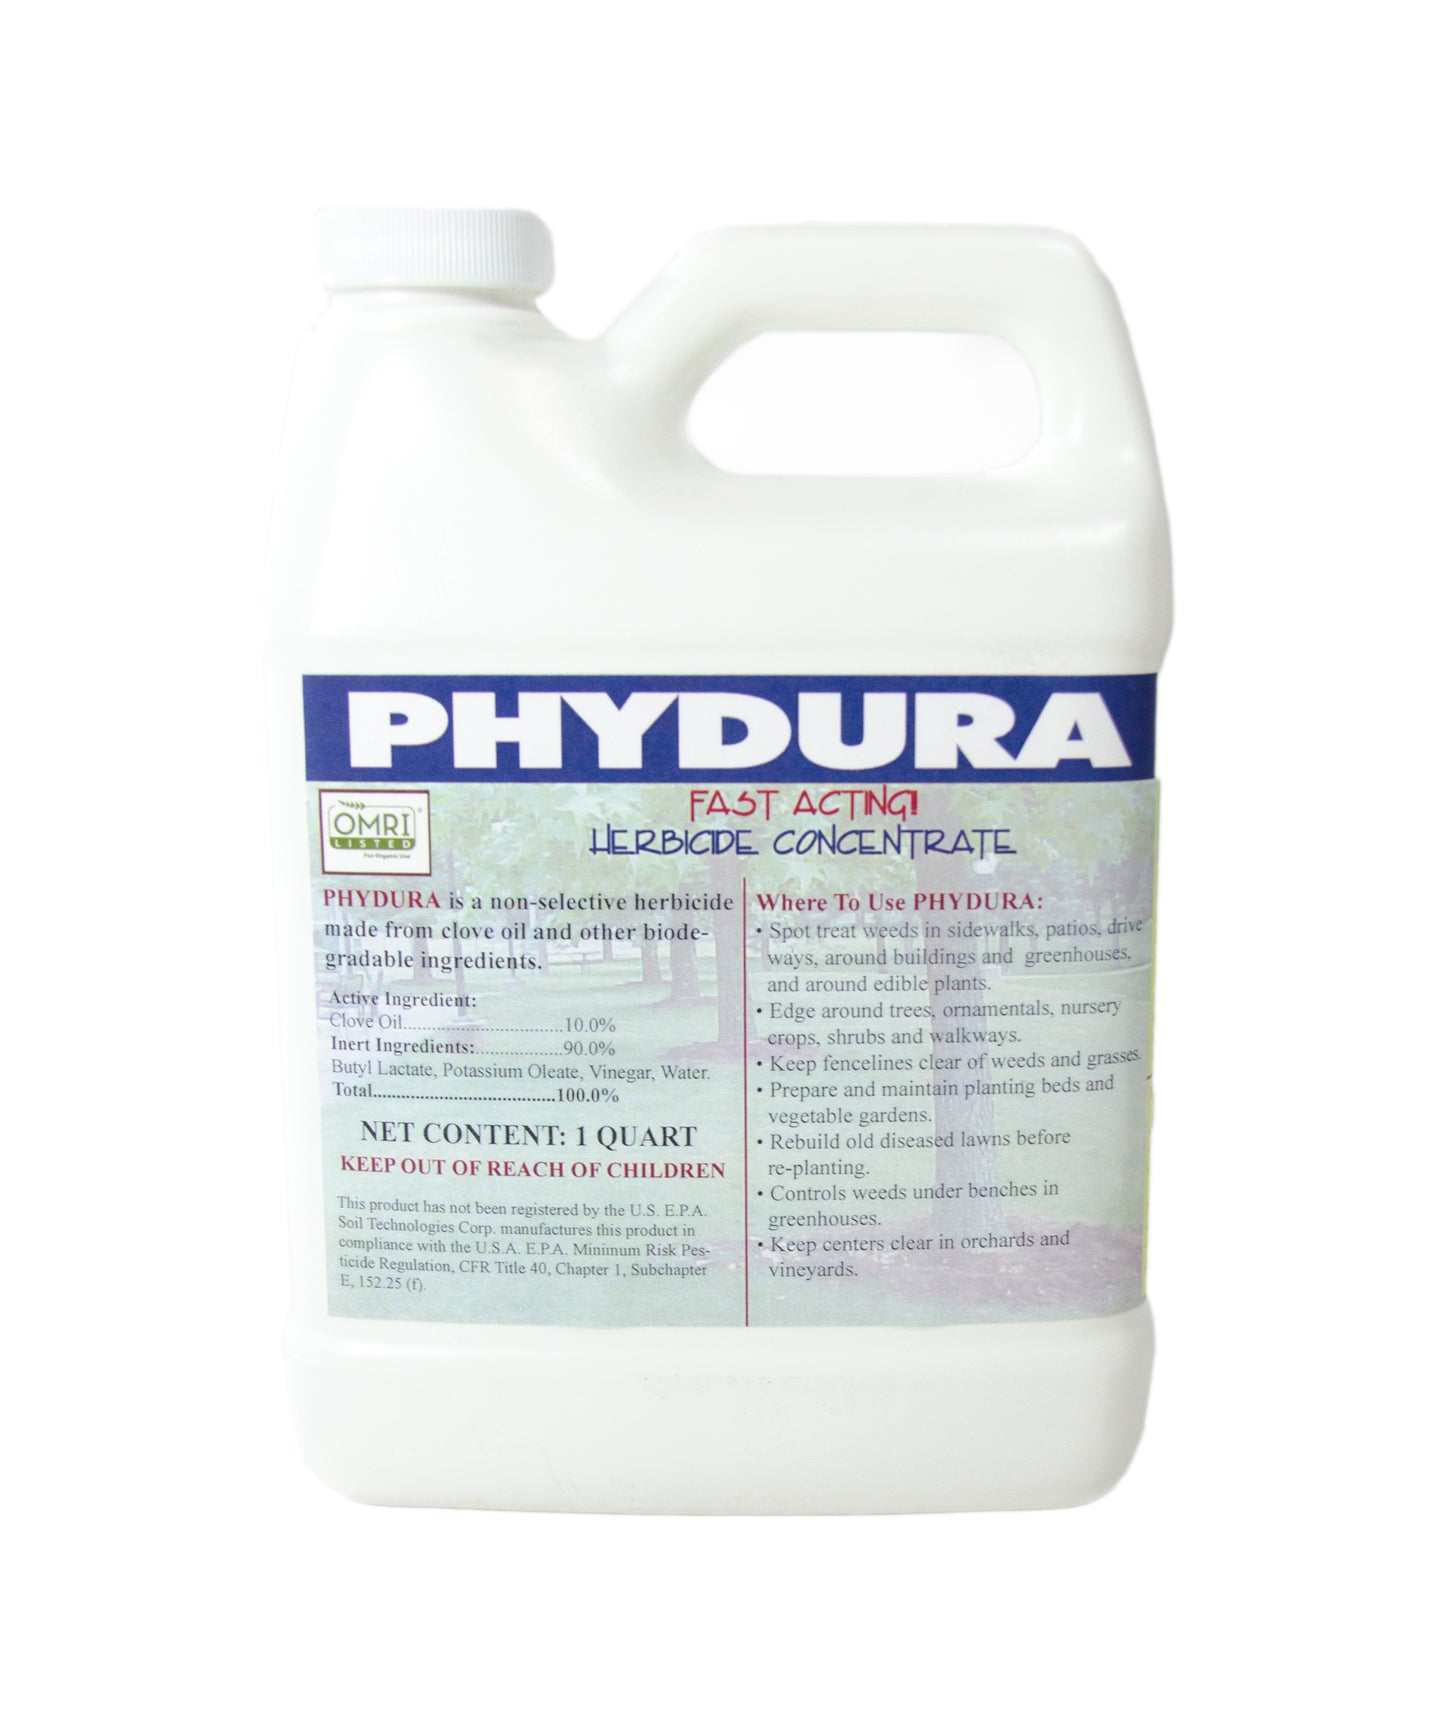 Phydura fast acting herbicide concentrate OMRI listed